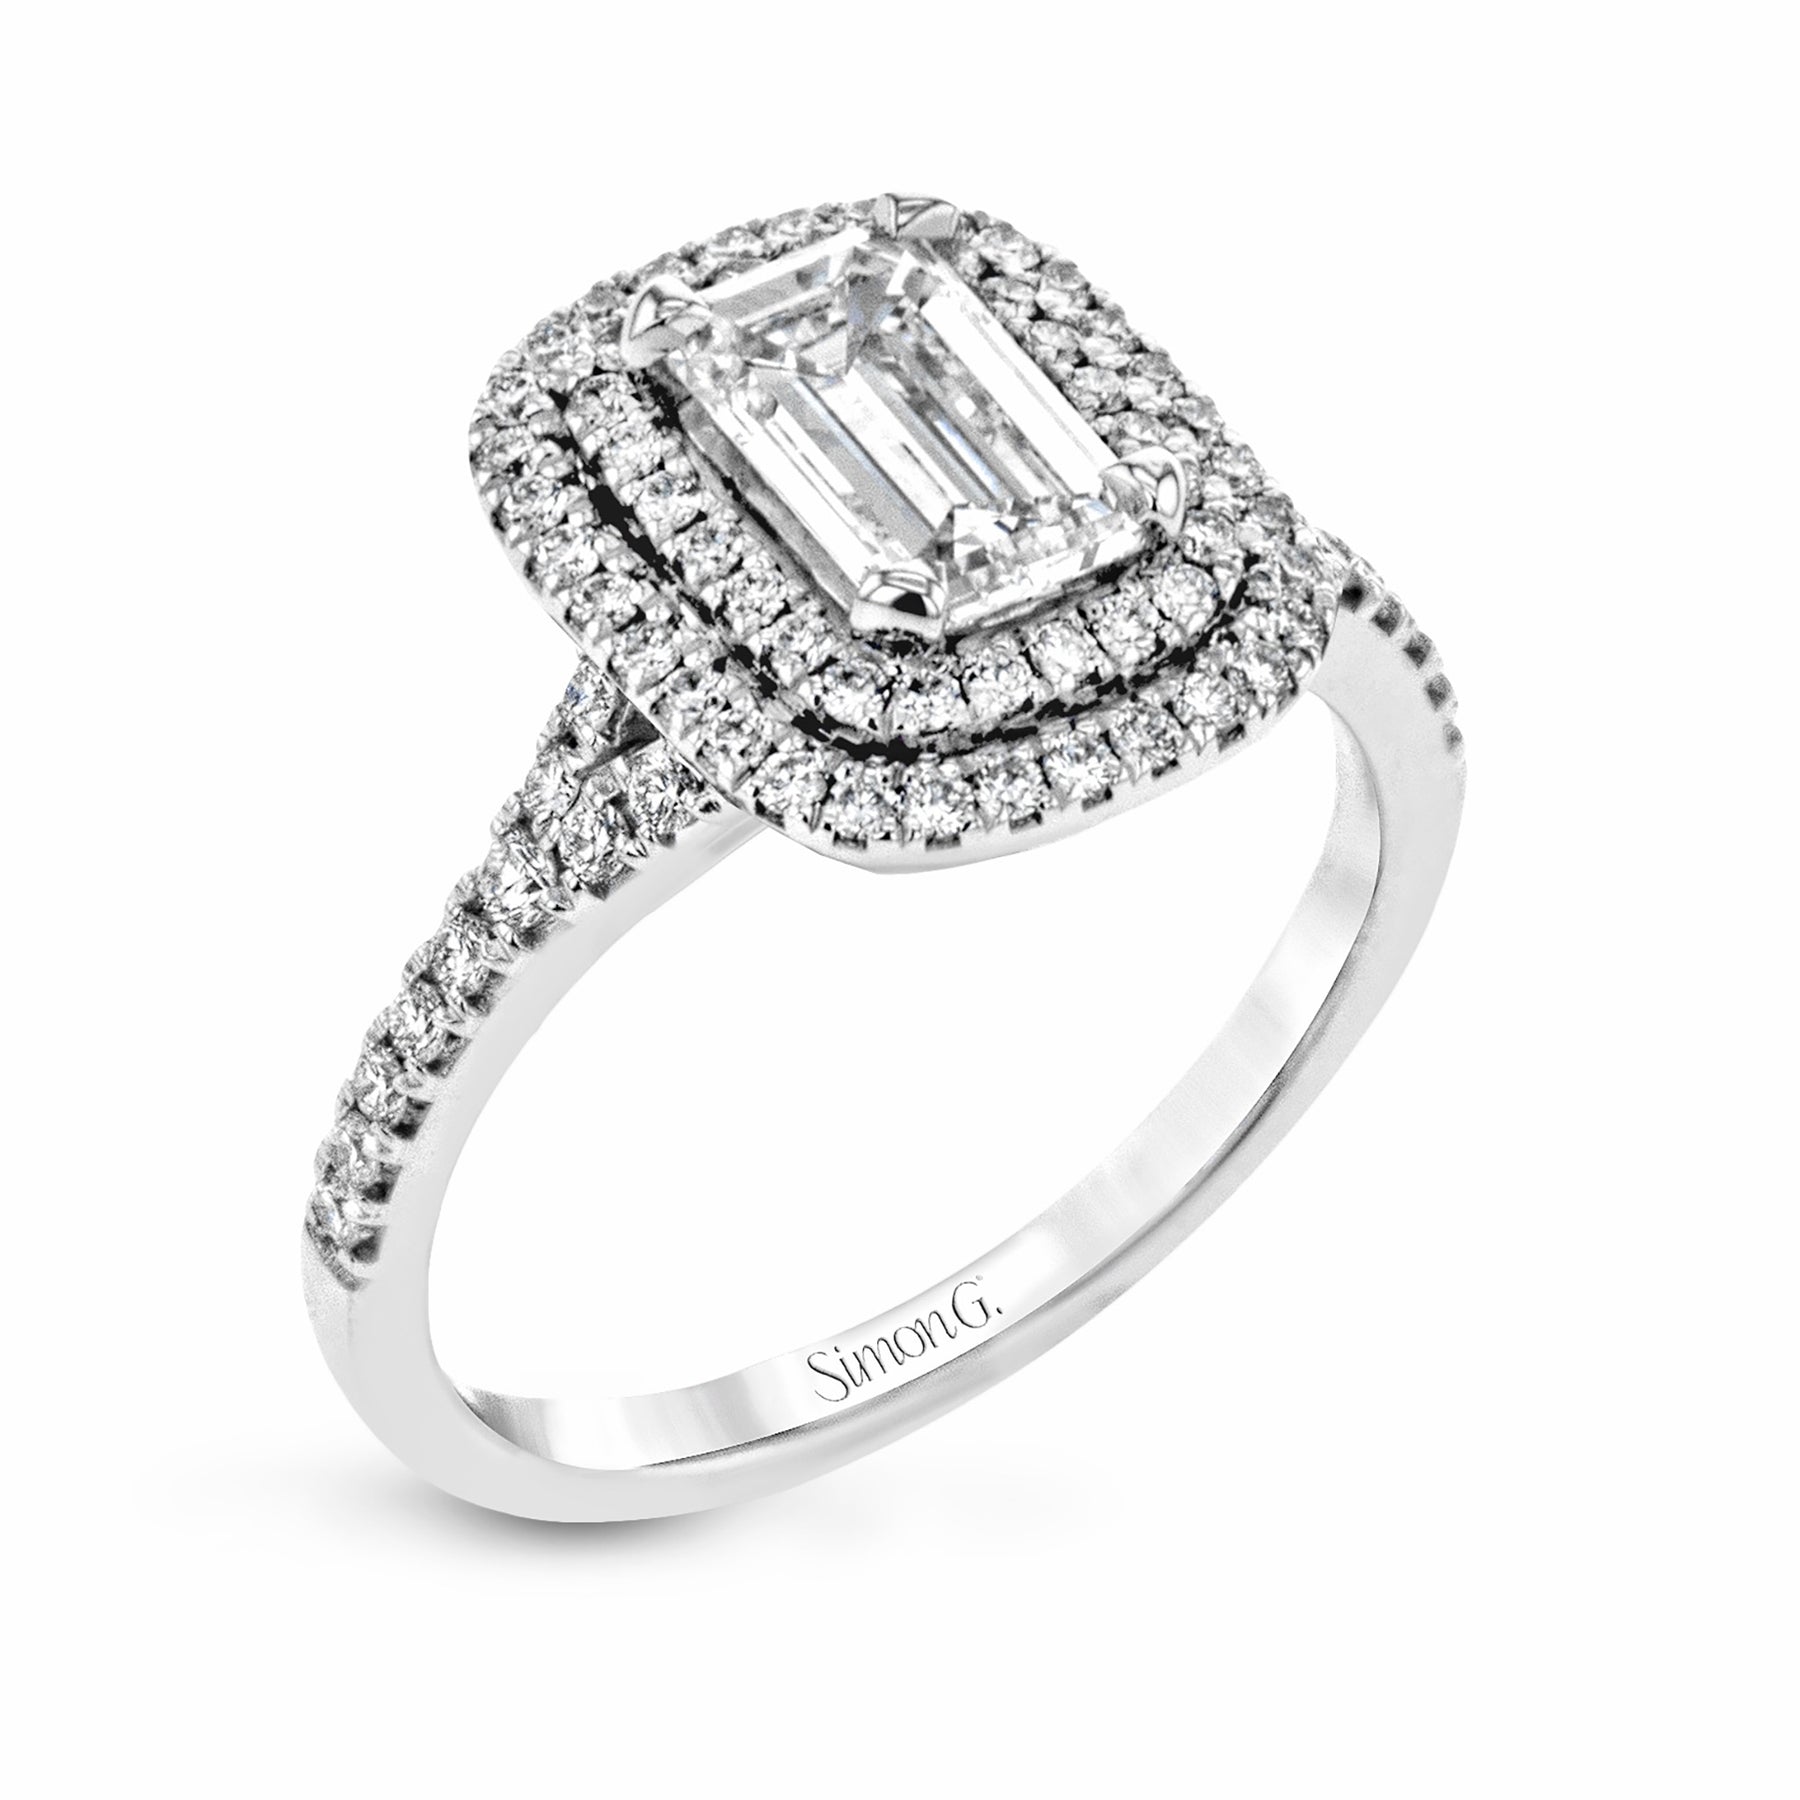 Emerald-Cut Double-Halo Engagement Ring In 18k Gold With Diamonds MR2884-EM